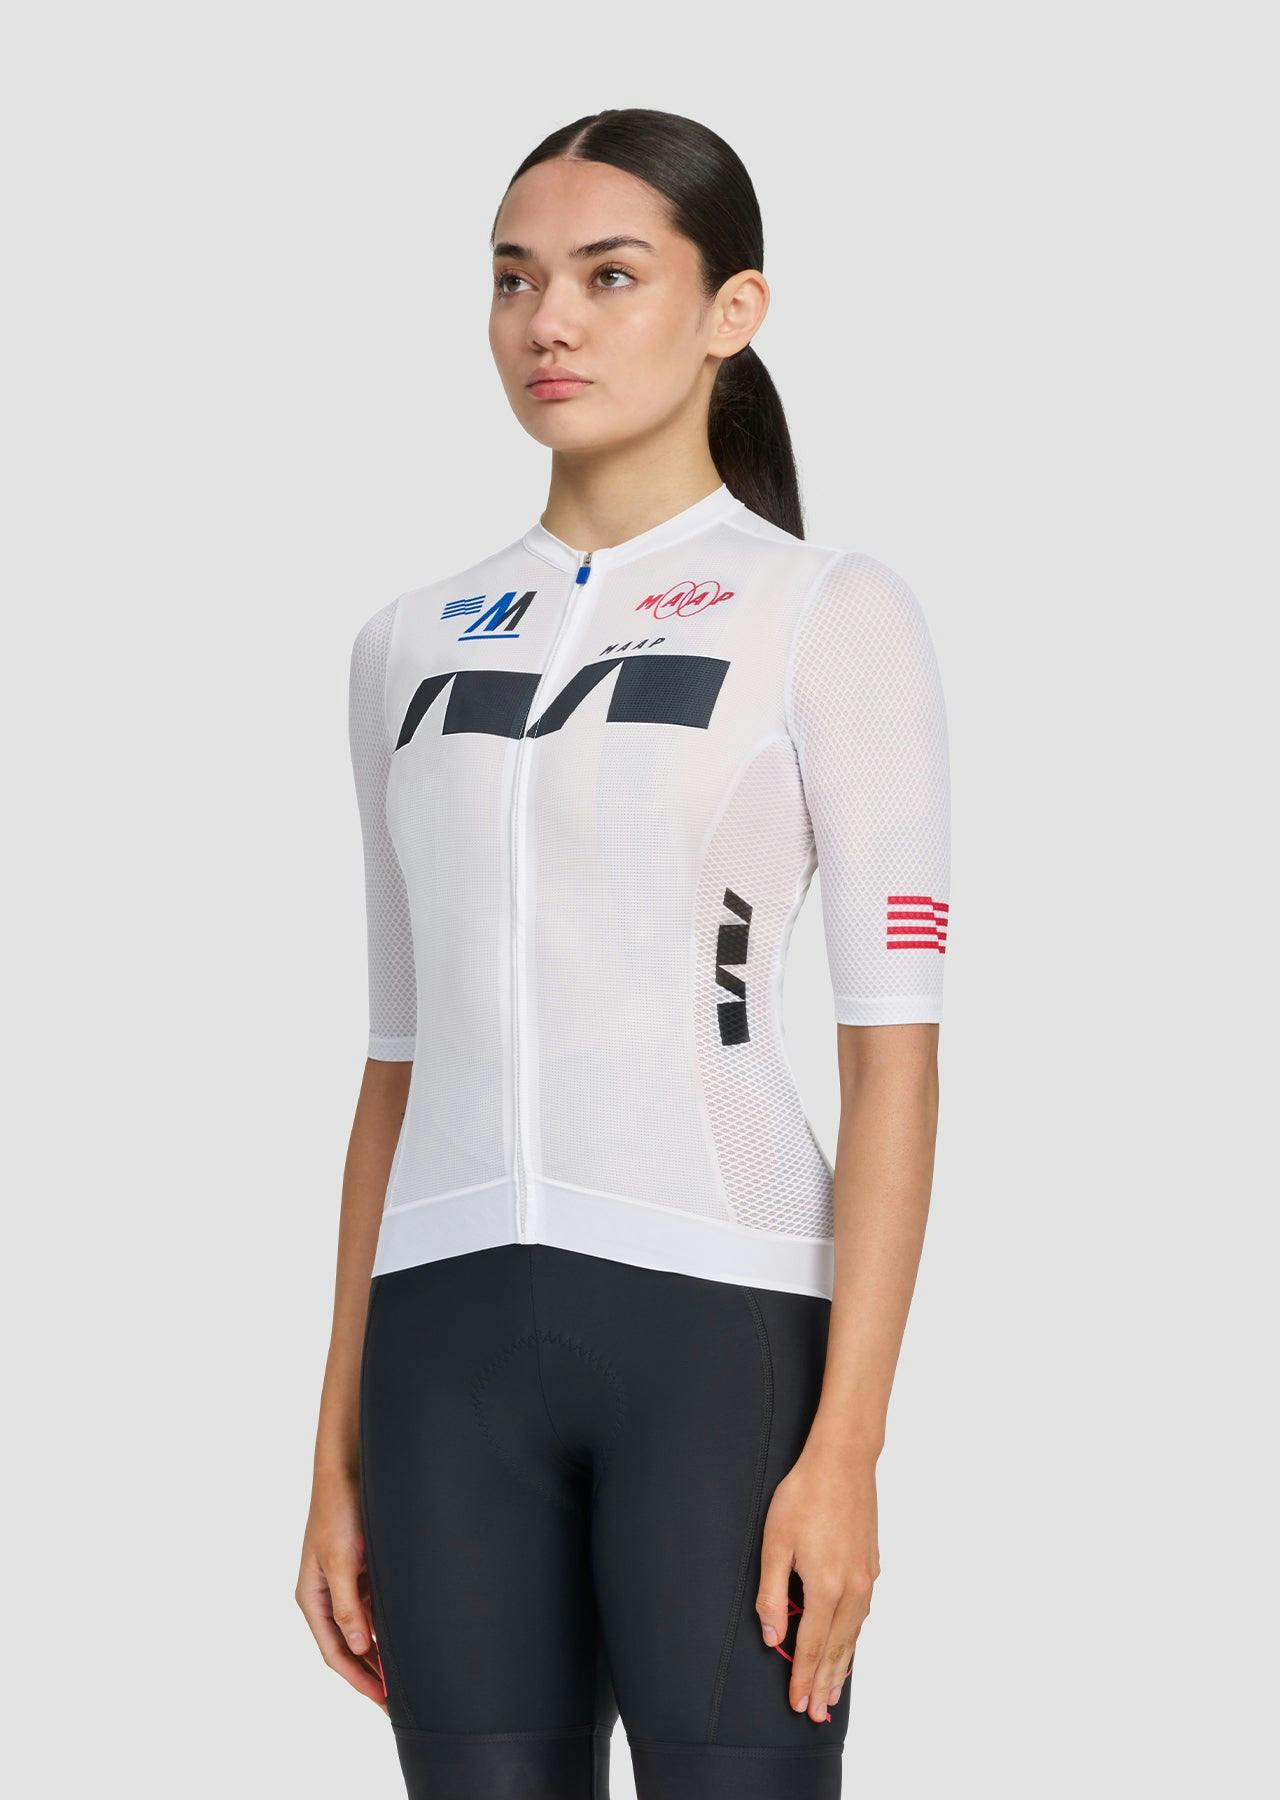 Women's Trace Pro Air Jersey